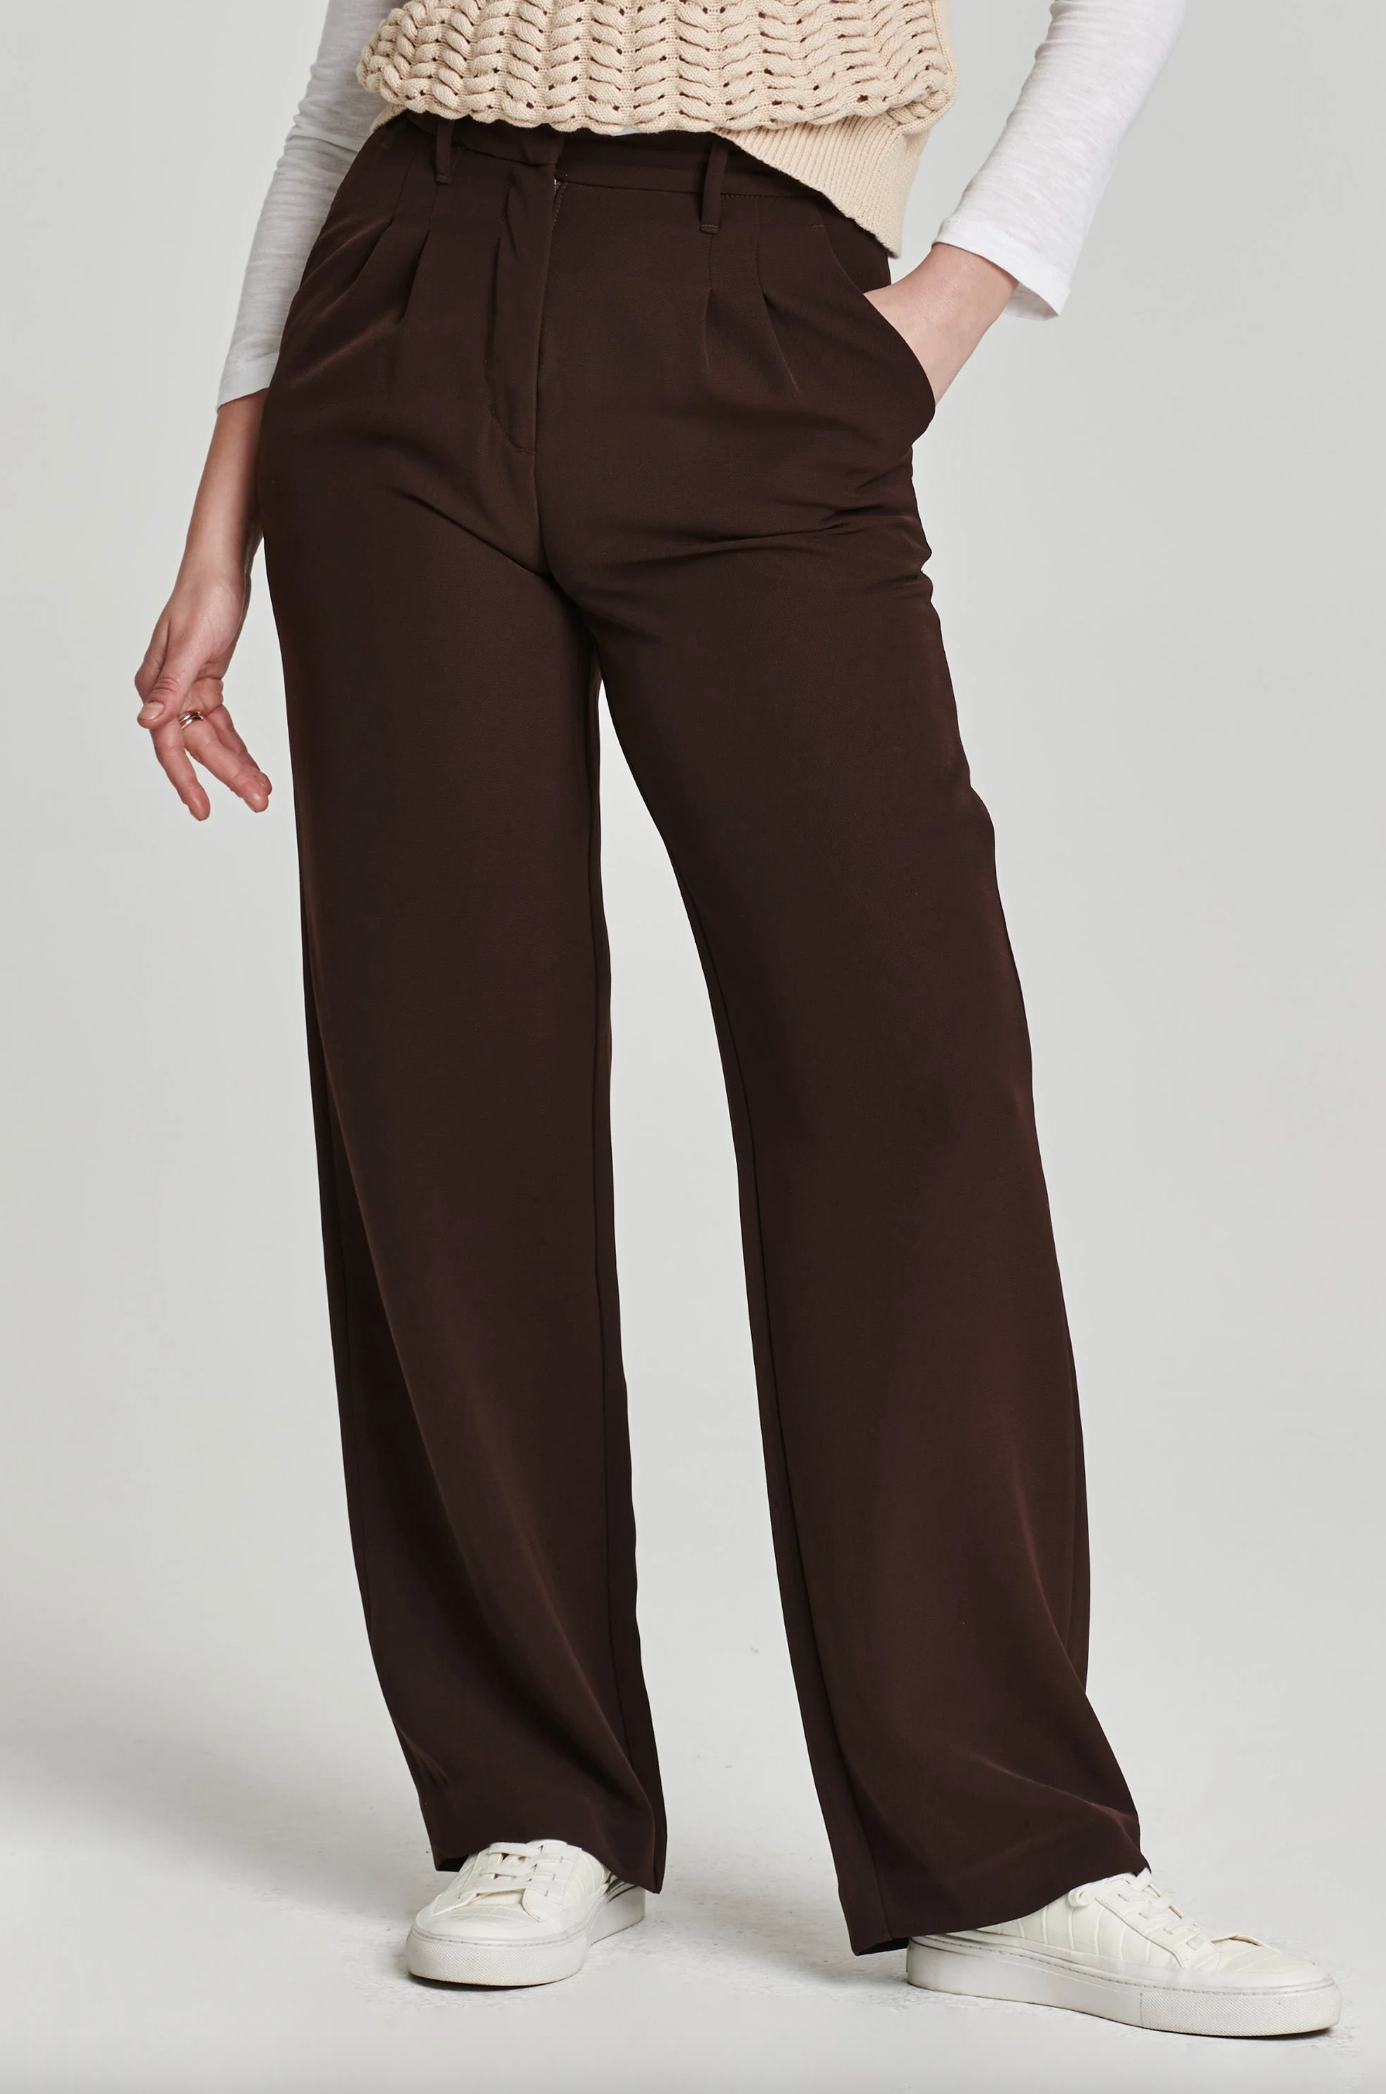 Adelaide Brown Pant Pants in  at Wrapsody